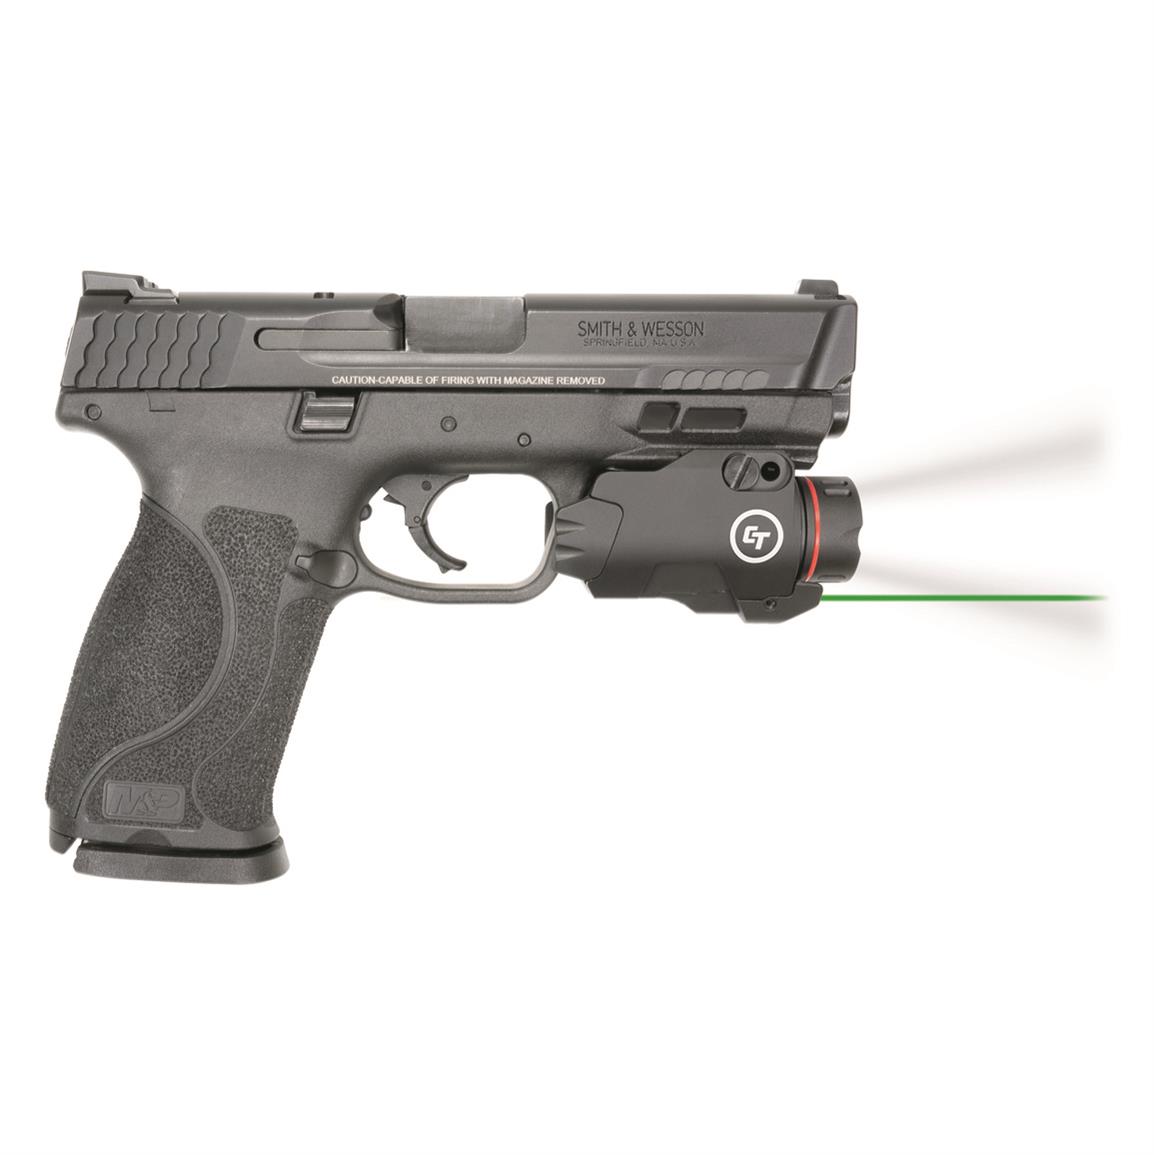 Crimson Trace LG489 Laserguard for Smith and Wesson M&P 9mm Shield for sale online 